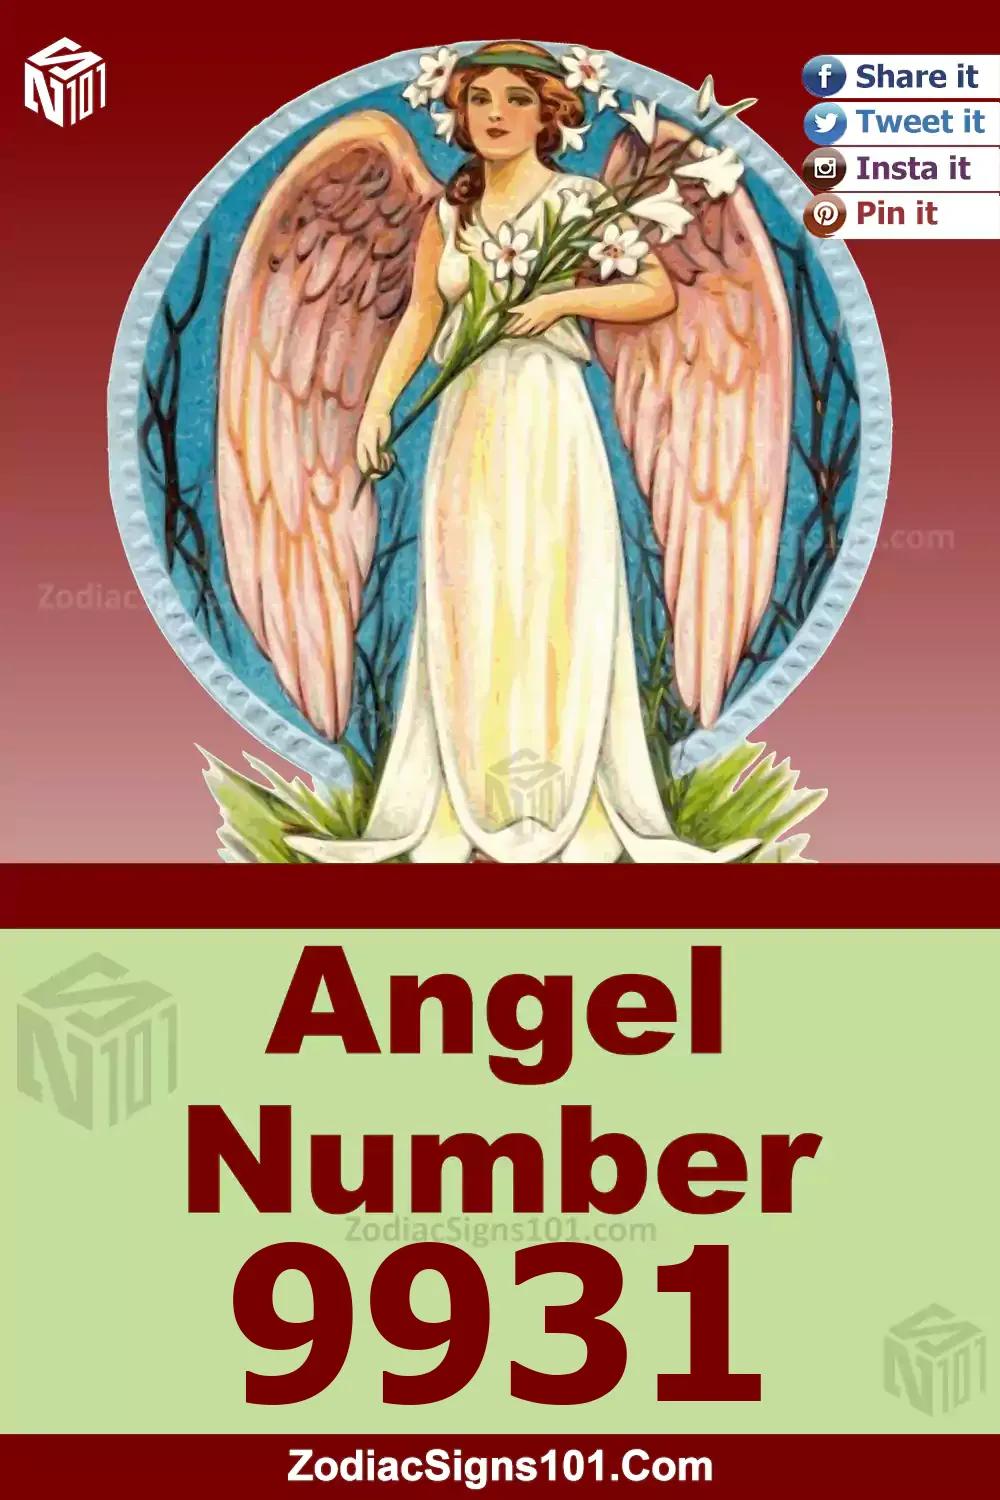 9931 Angel Number Meaning